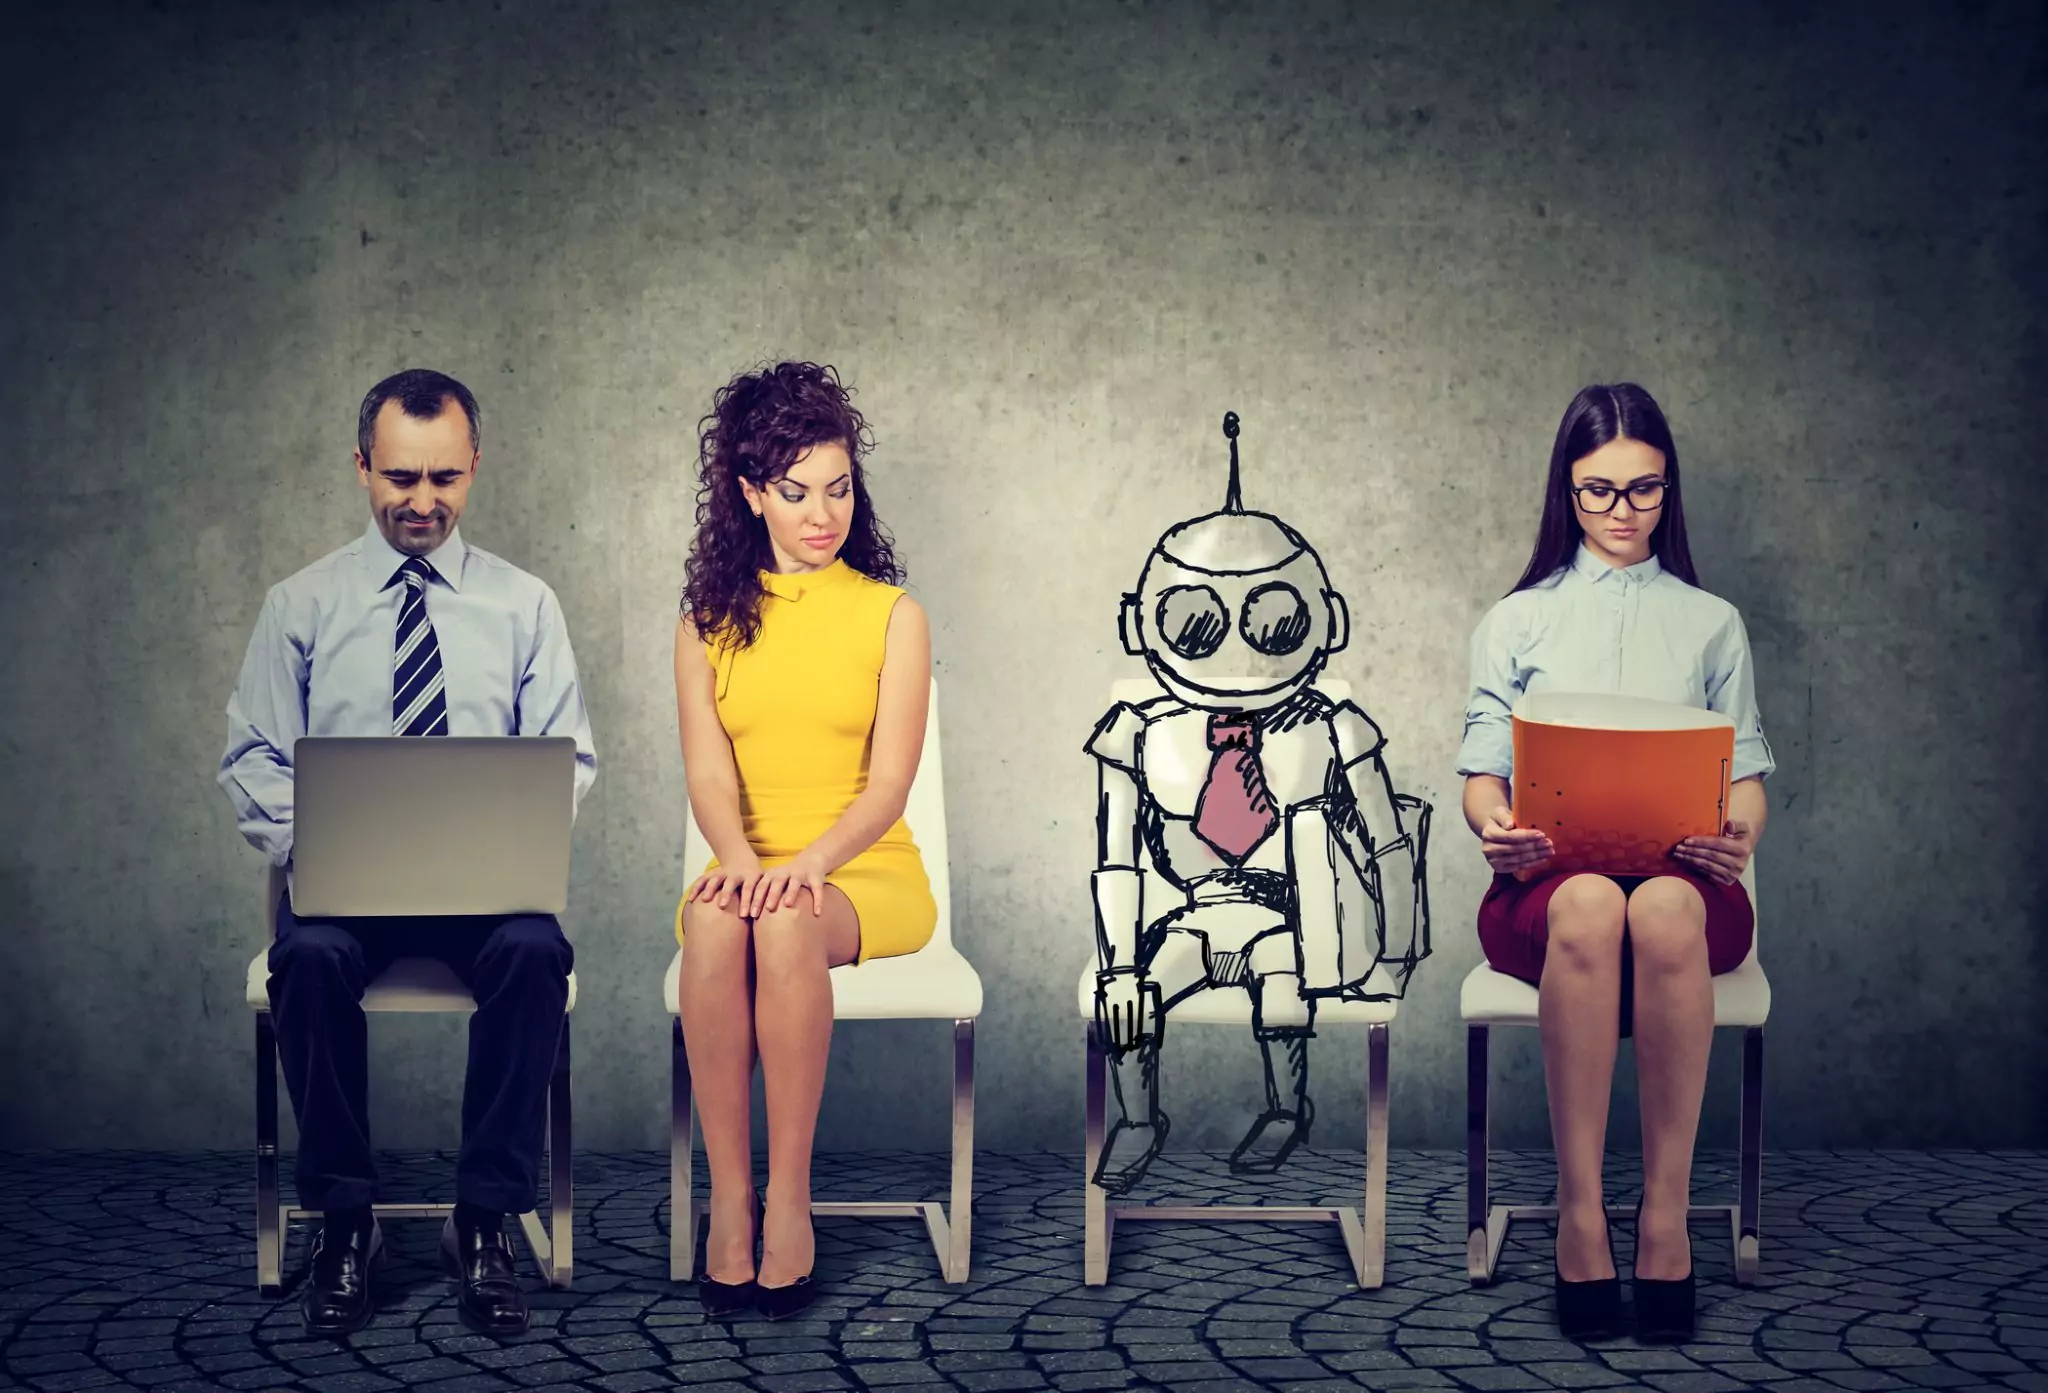 Artificial intelligence in your eLearning program may give your company an advantage.